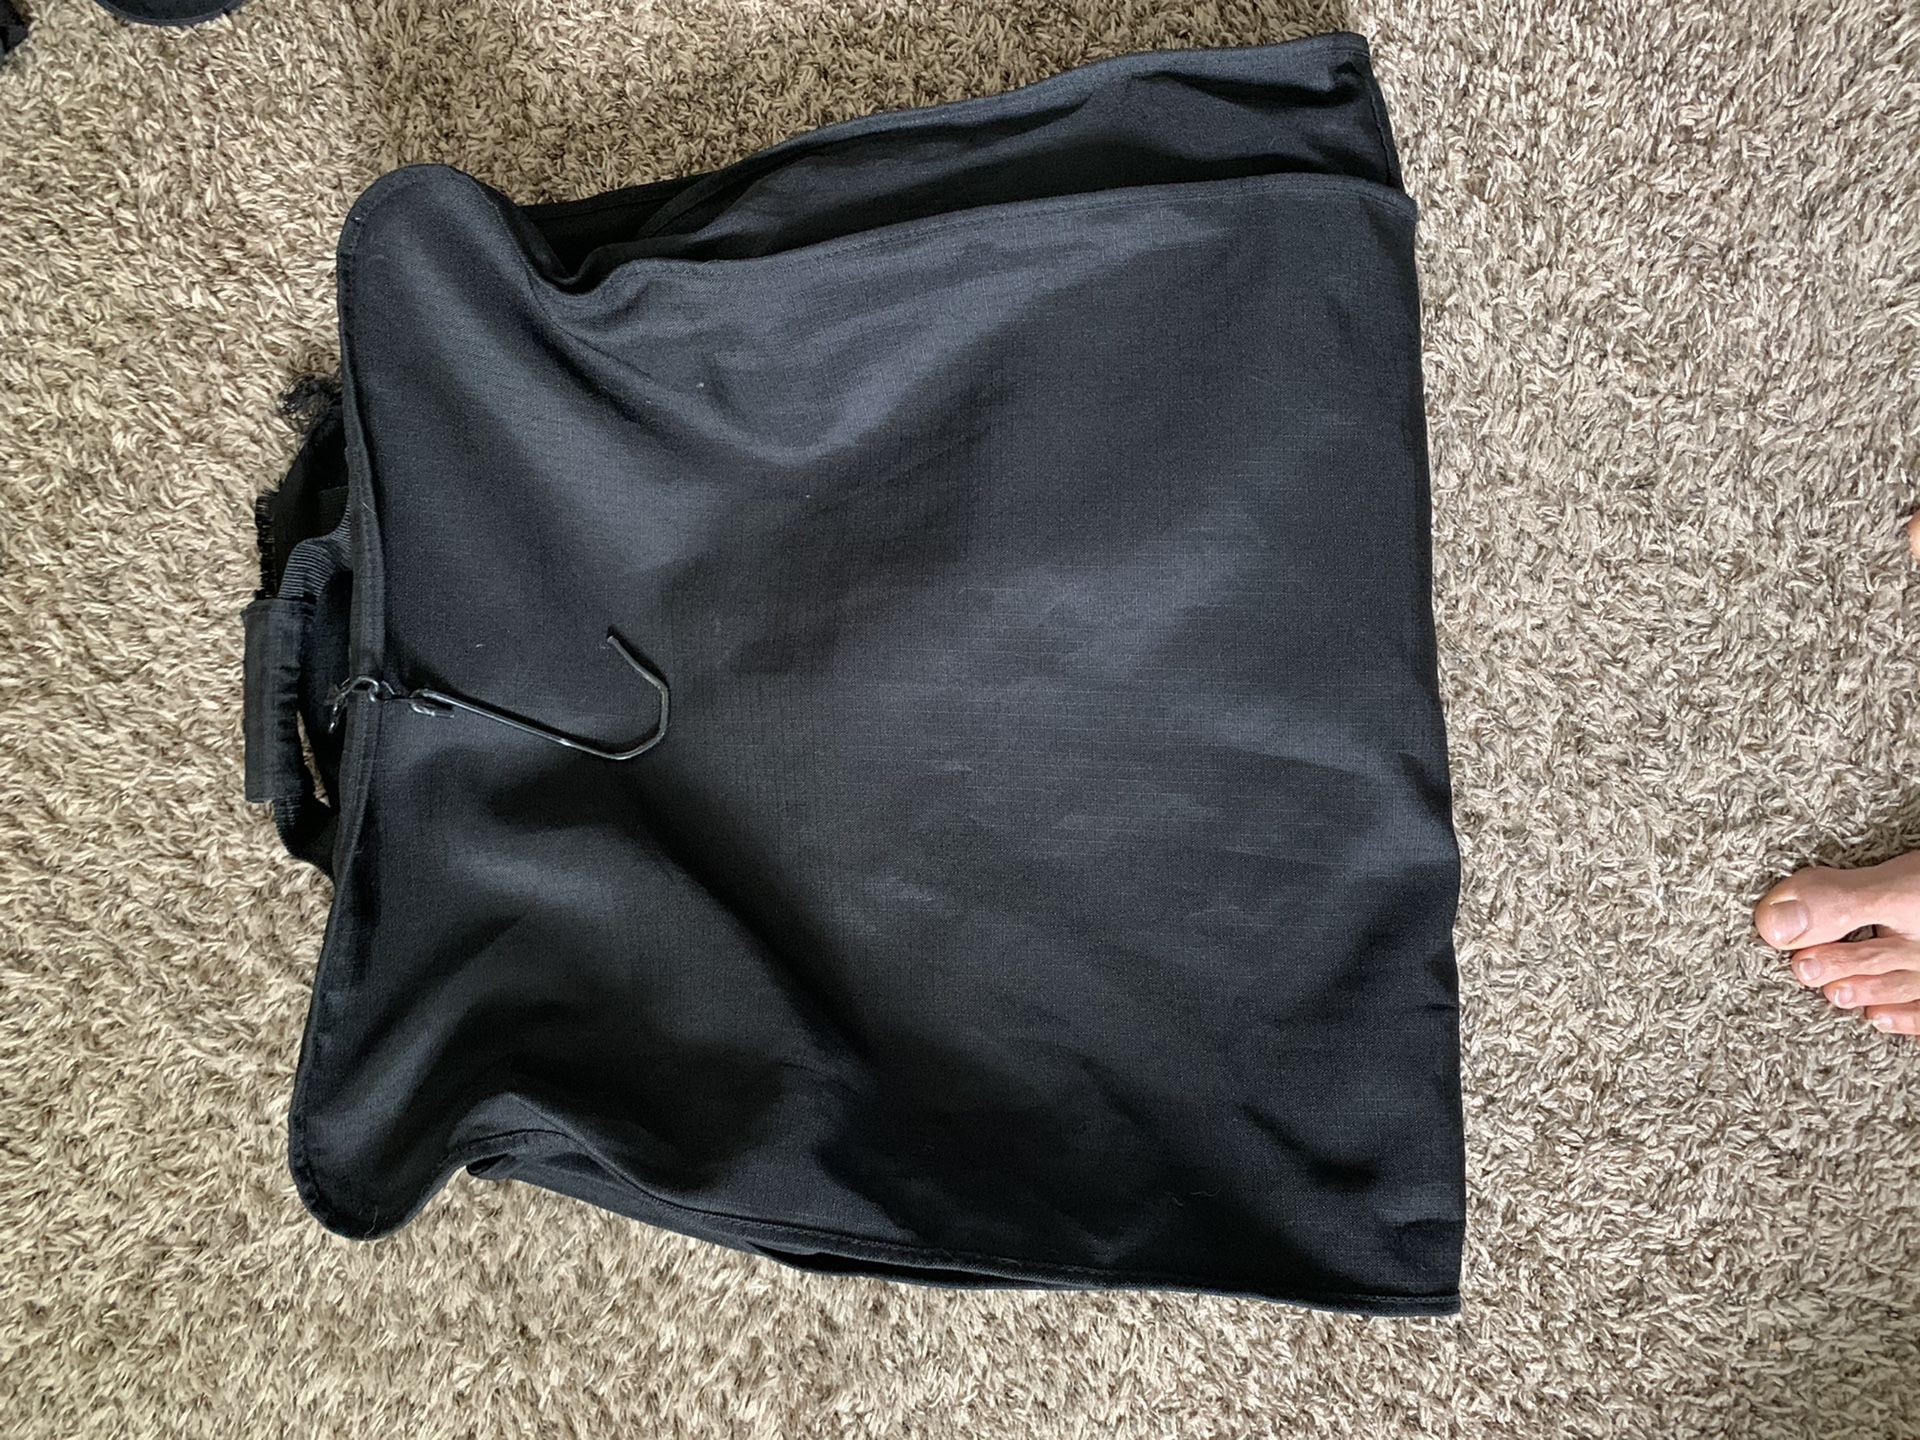 Global gear garment bag folds into for easy travel sea box 11 tour needs fixing